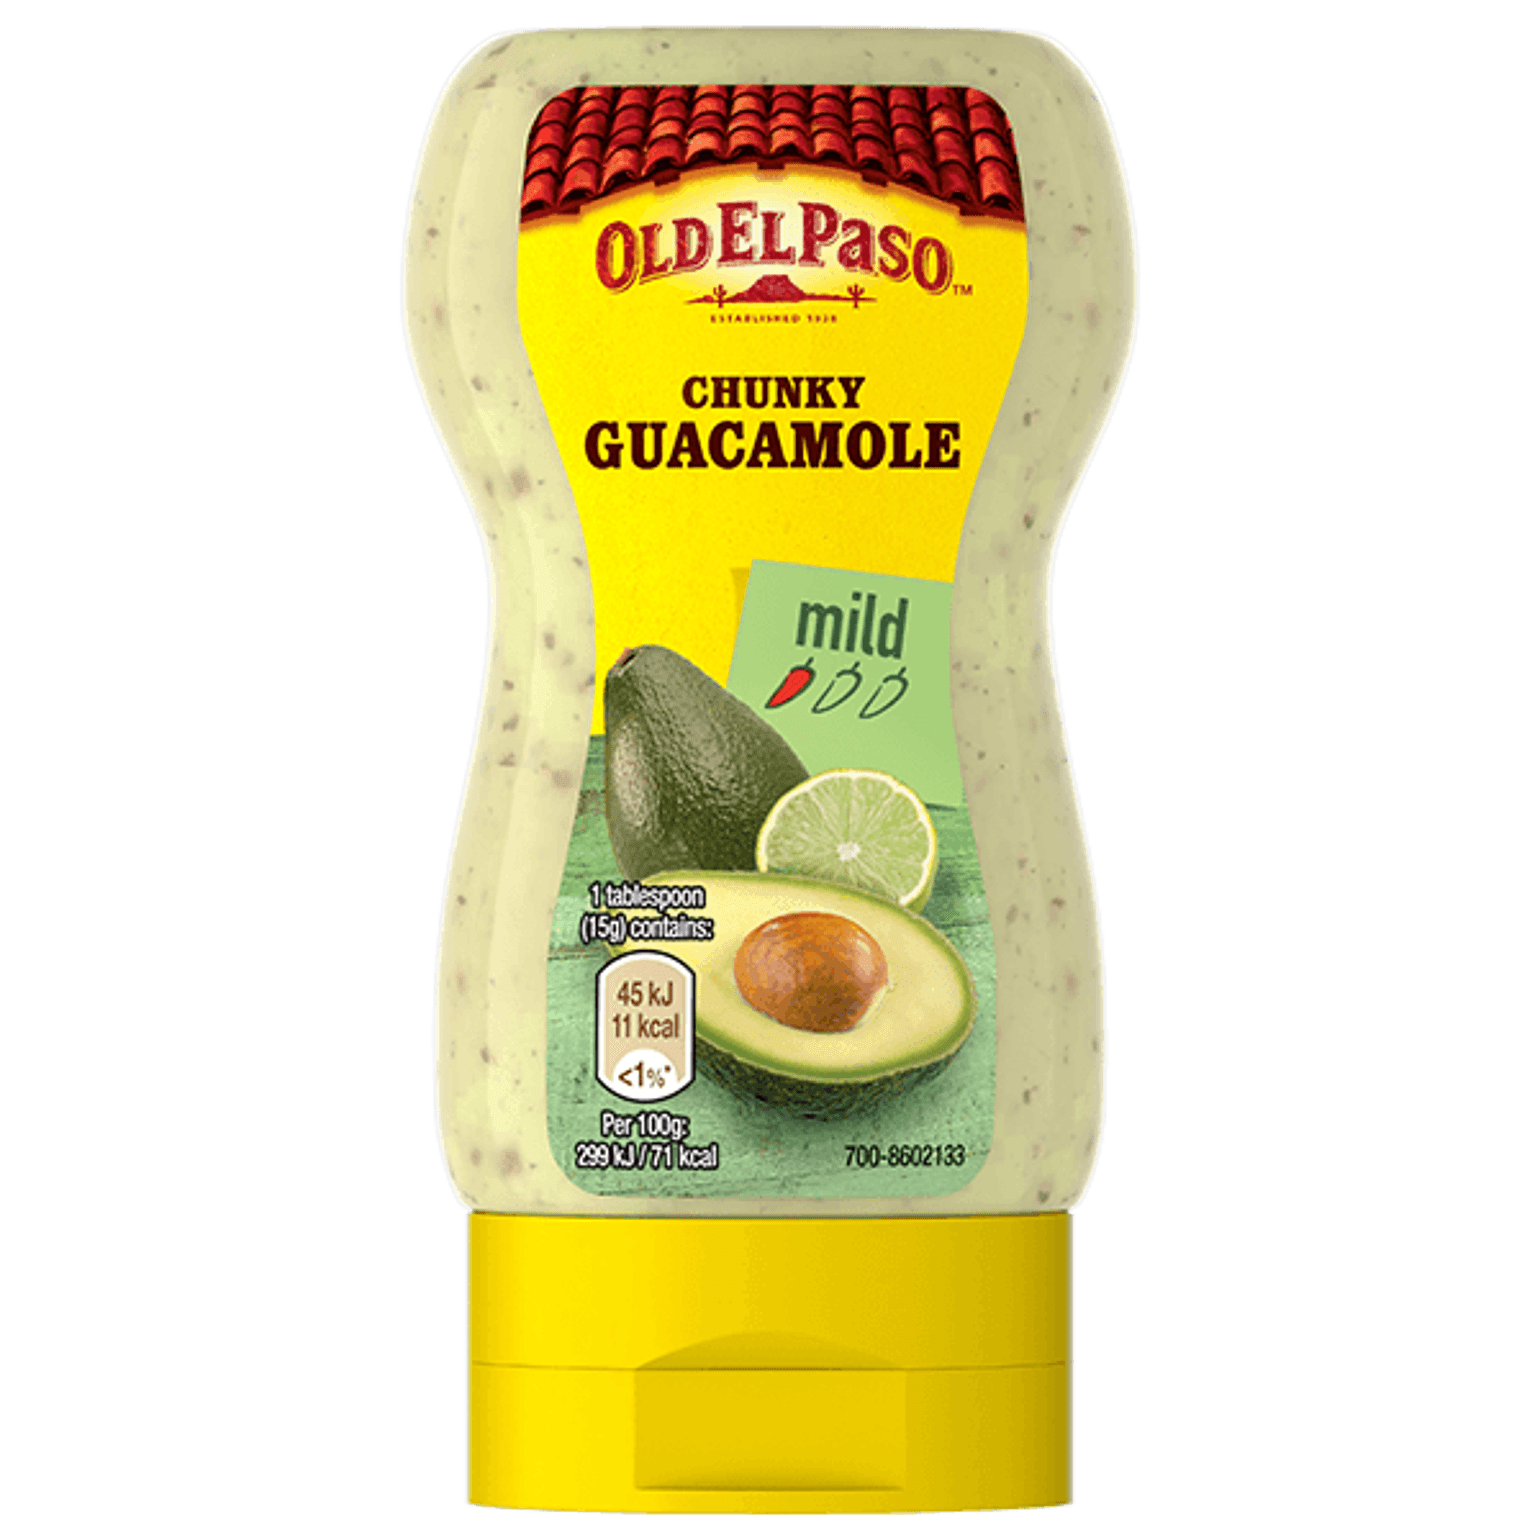 squeezy bottle of Old El Paso's chunky guacamole (240g)